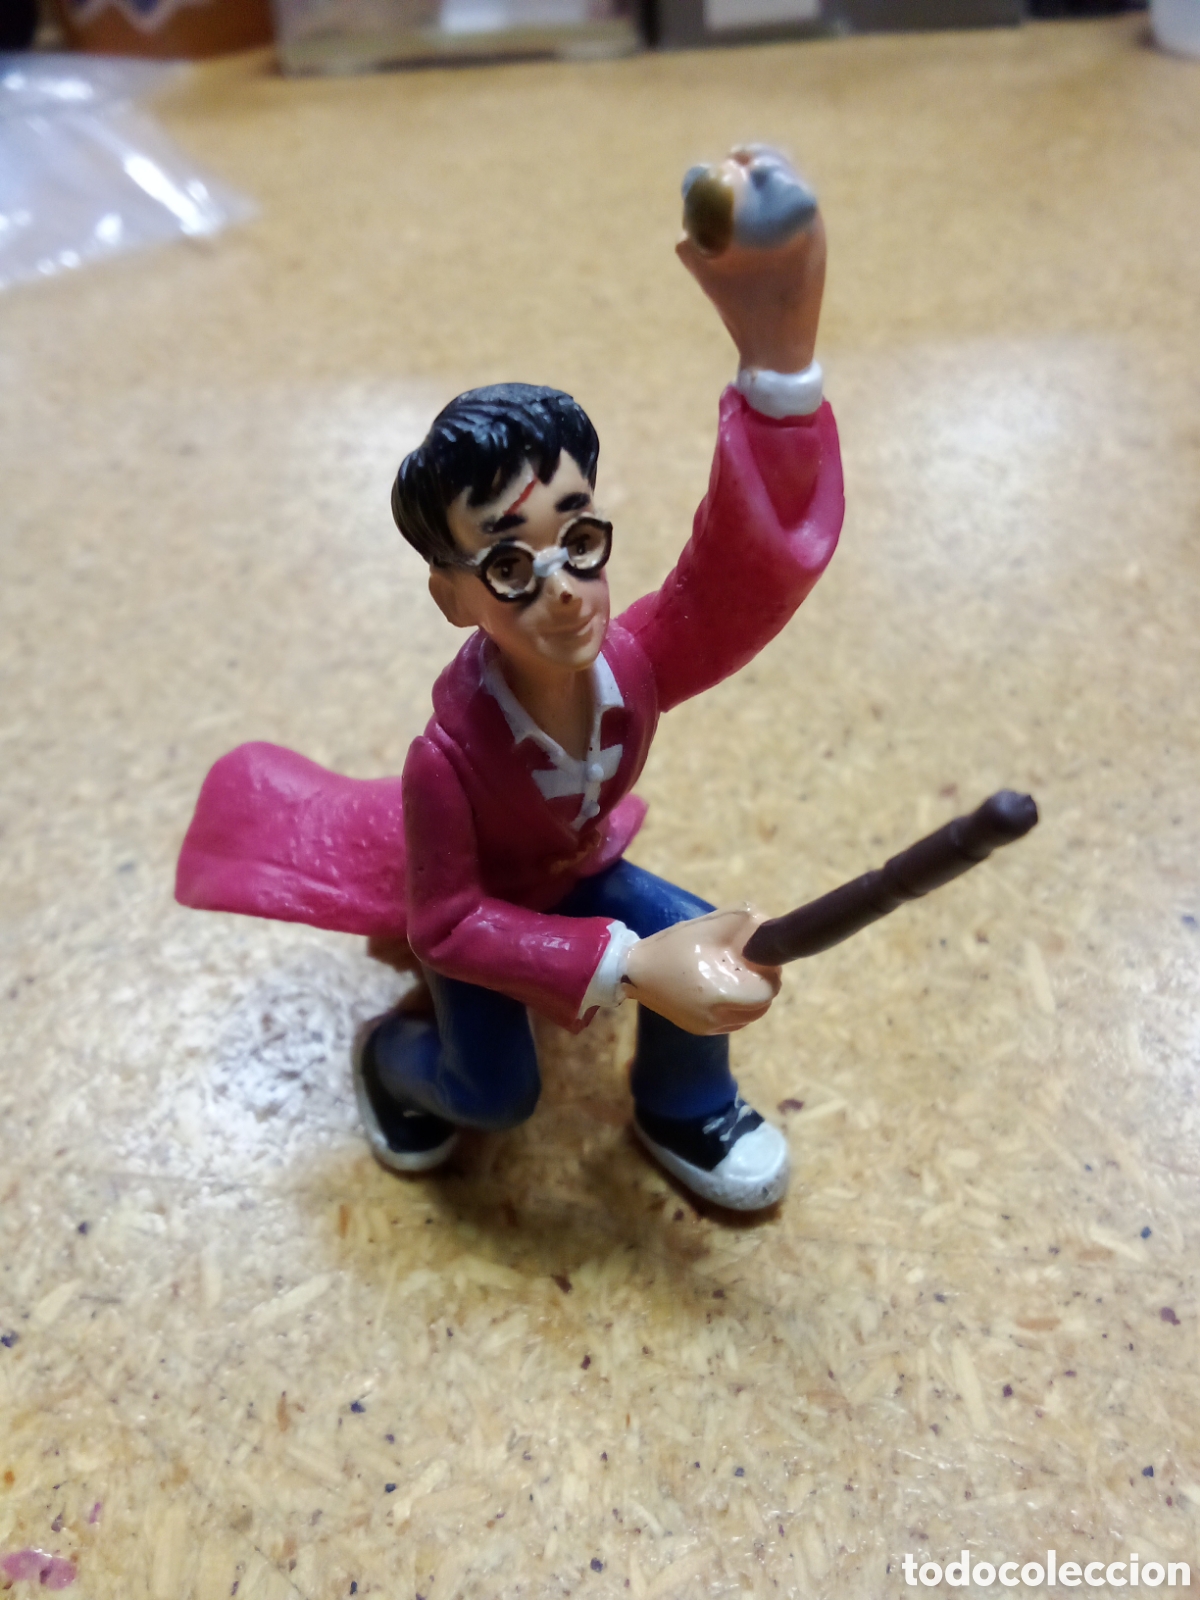 harry potter pvc! - Buy Other rubber and PVC figures on todocoleccion